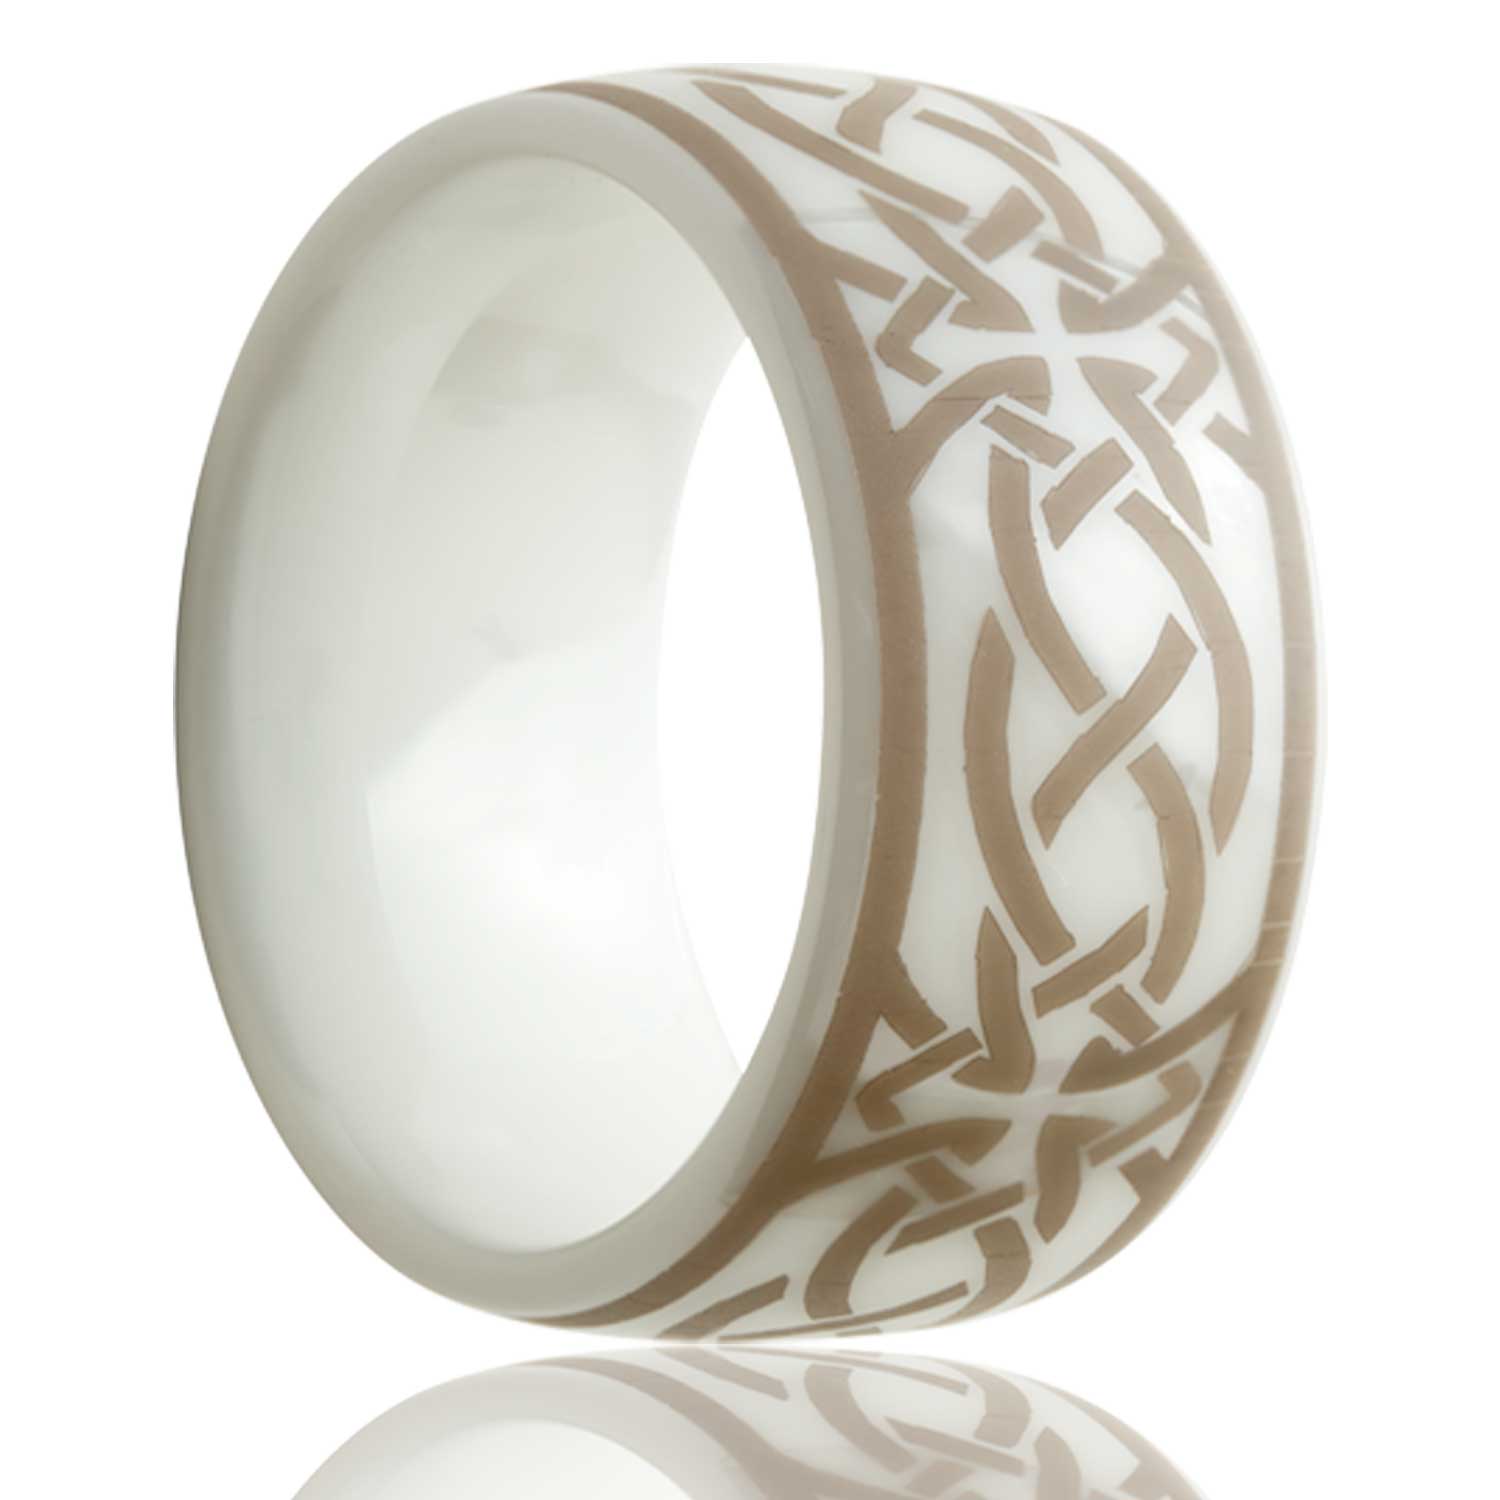 A celtic cross knot domed white ceramic men's wedding band displayed on a neutral white background.